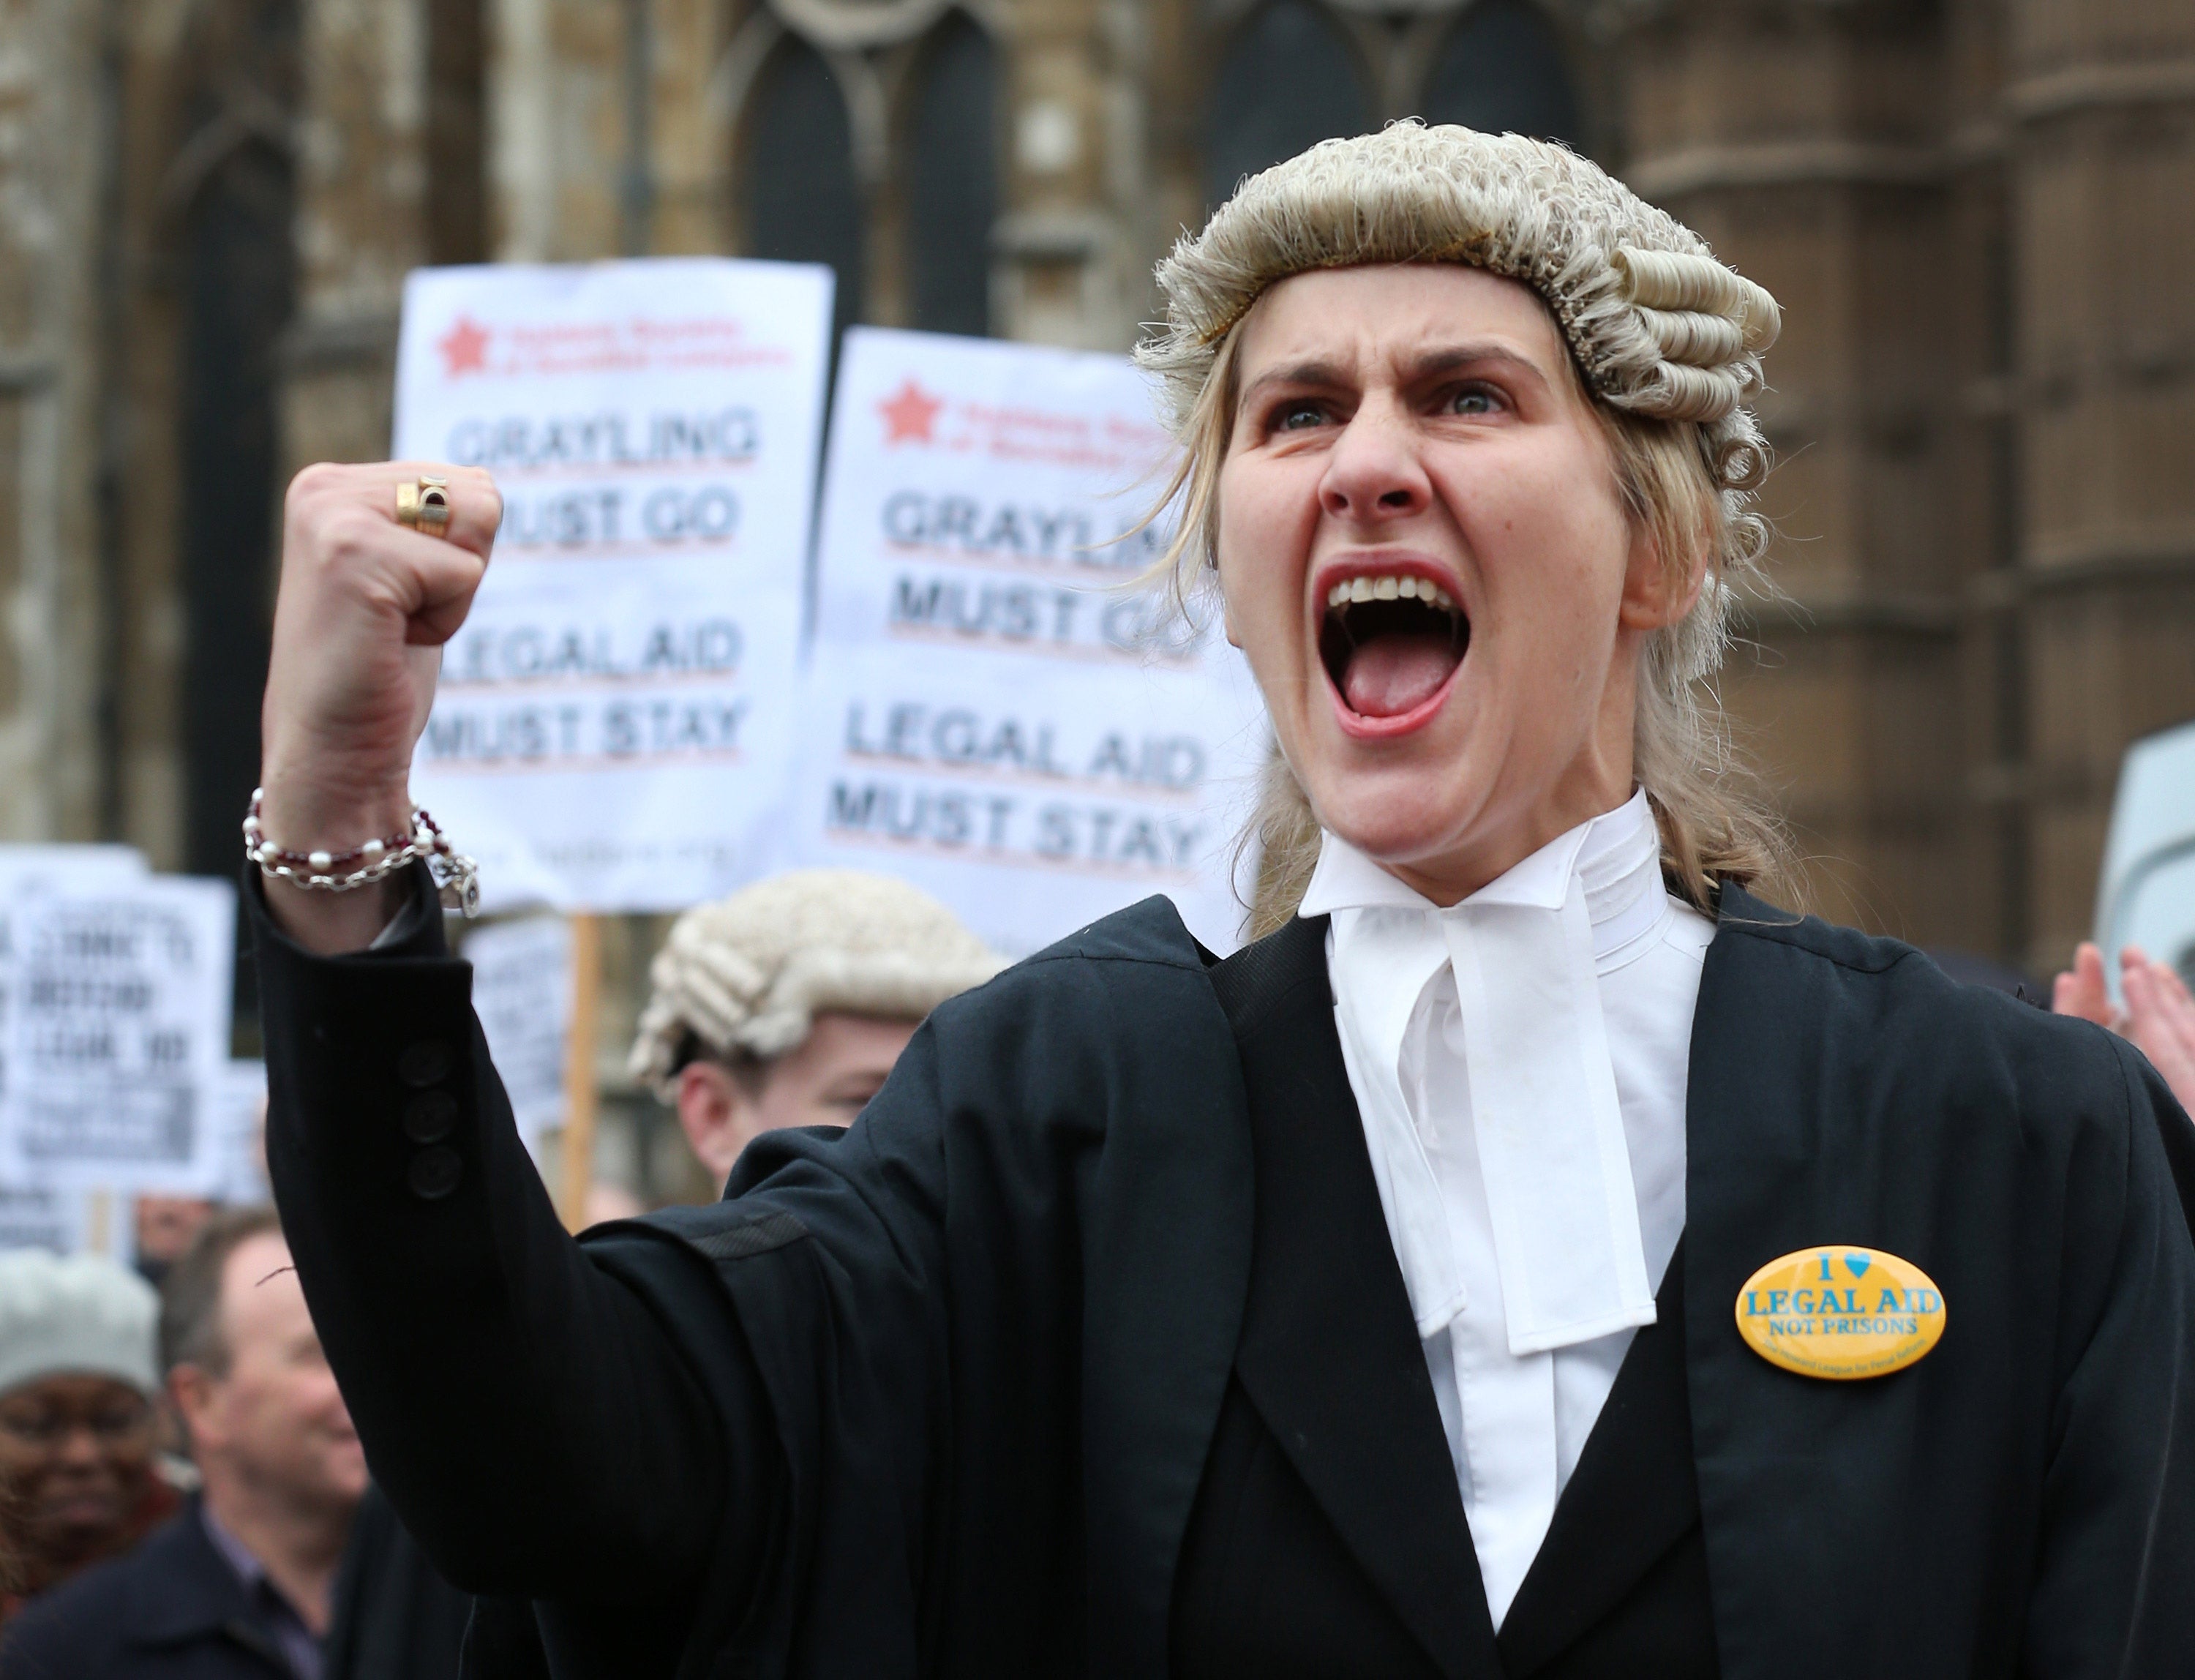 Lawyers protest cuts to legal aid